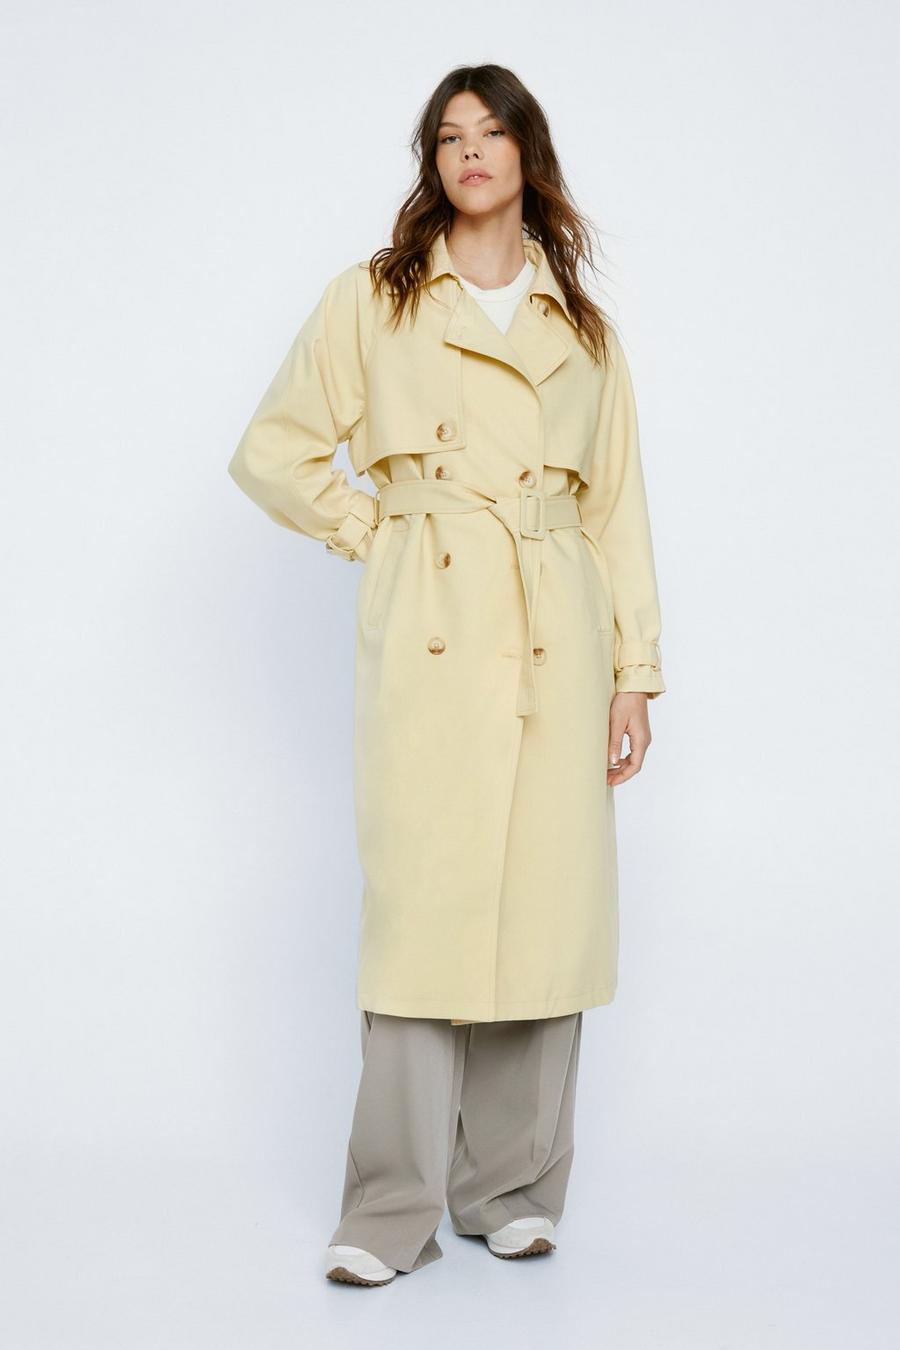 Lemon Twill Double Breasted Trench Coat